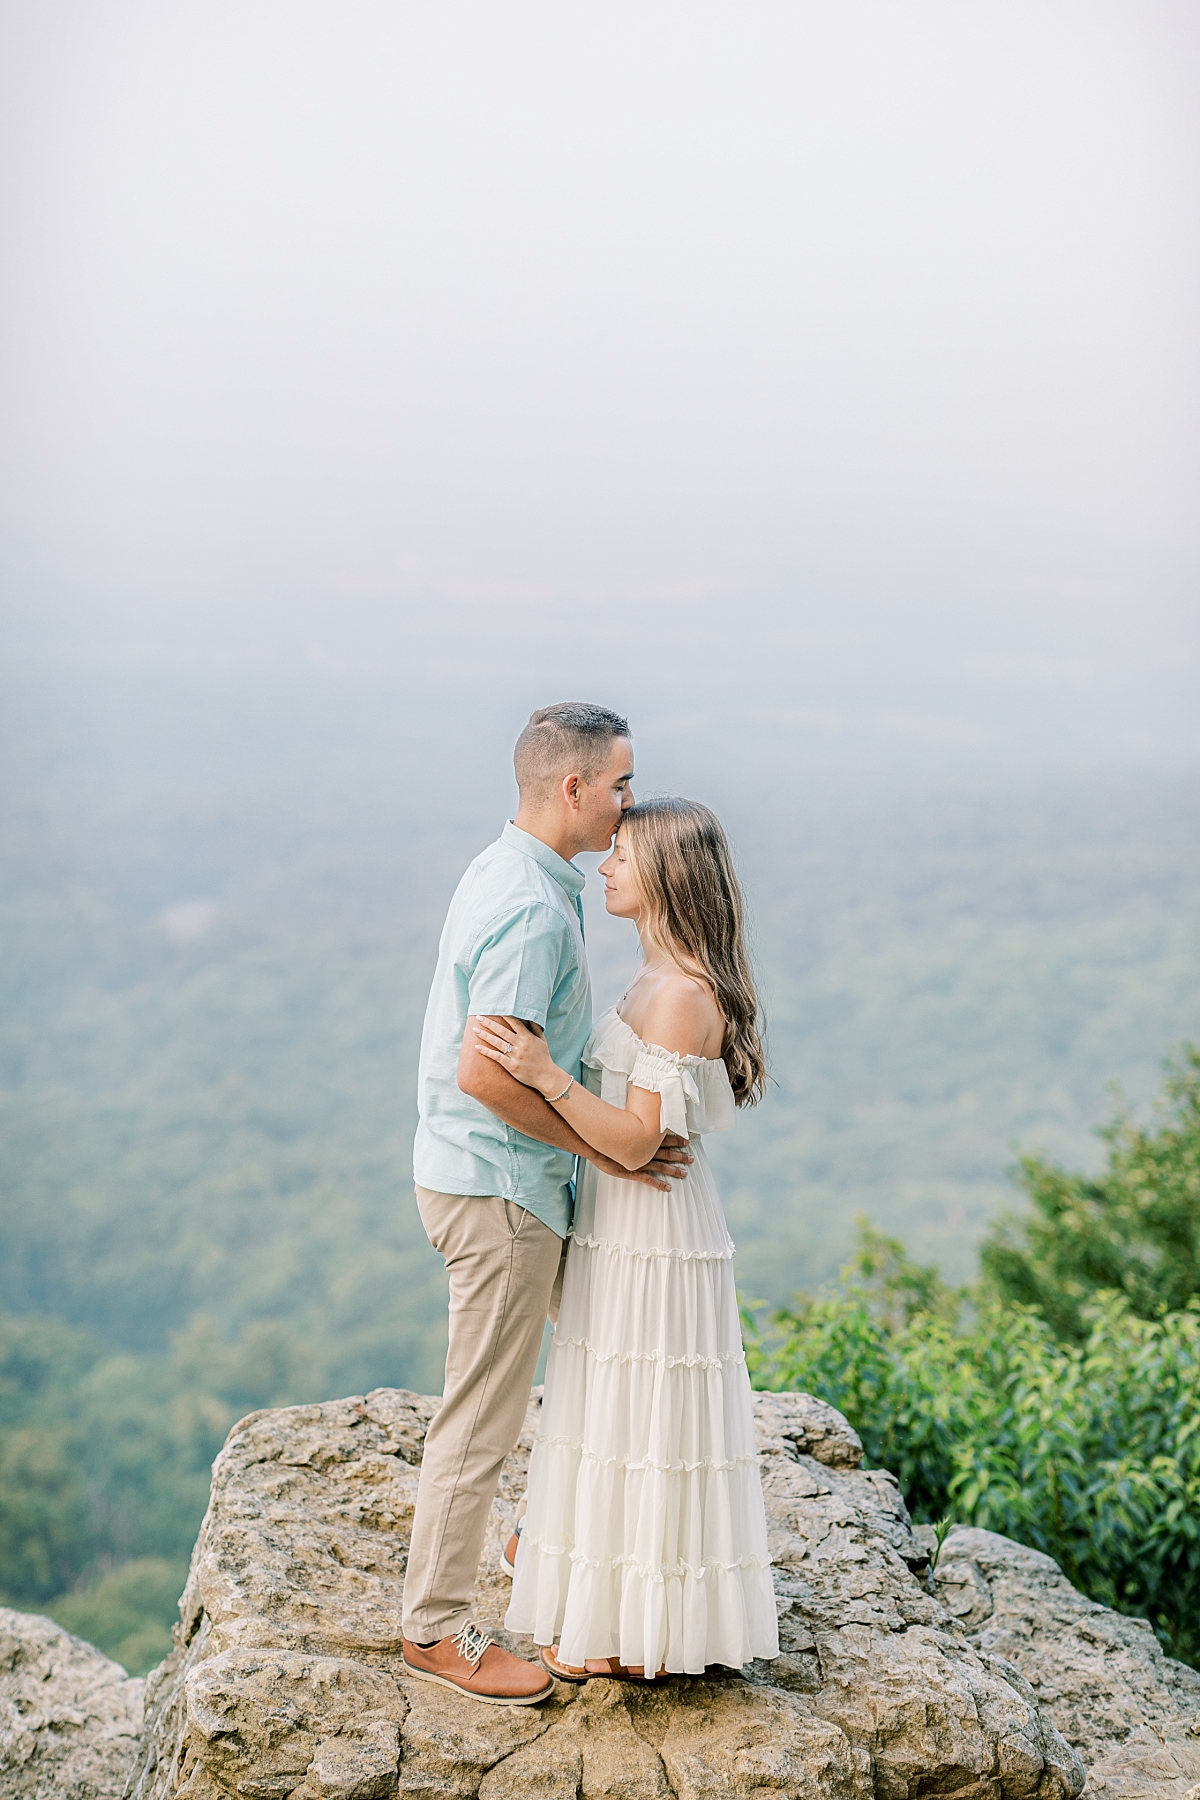 Engagement photo of a couple at Hawk Mountain Sanctuary in PA. The couple stands on rocks with a beautiful view as the groom kisses the bride's forehead